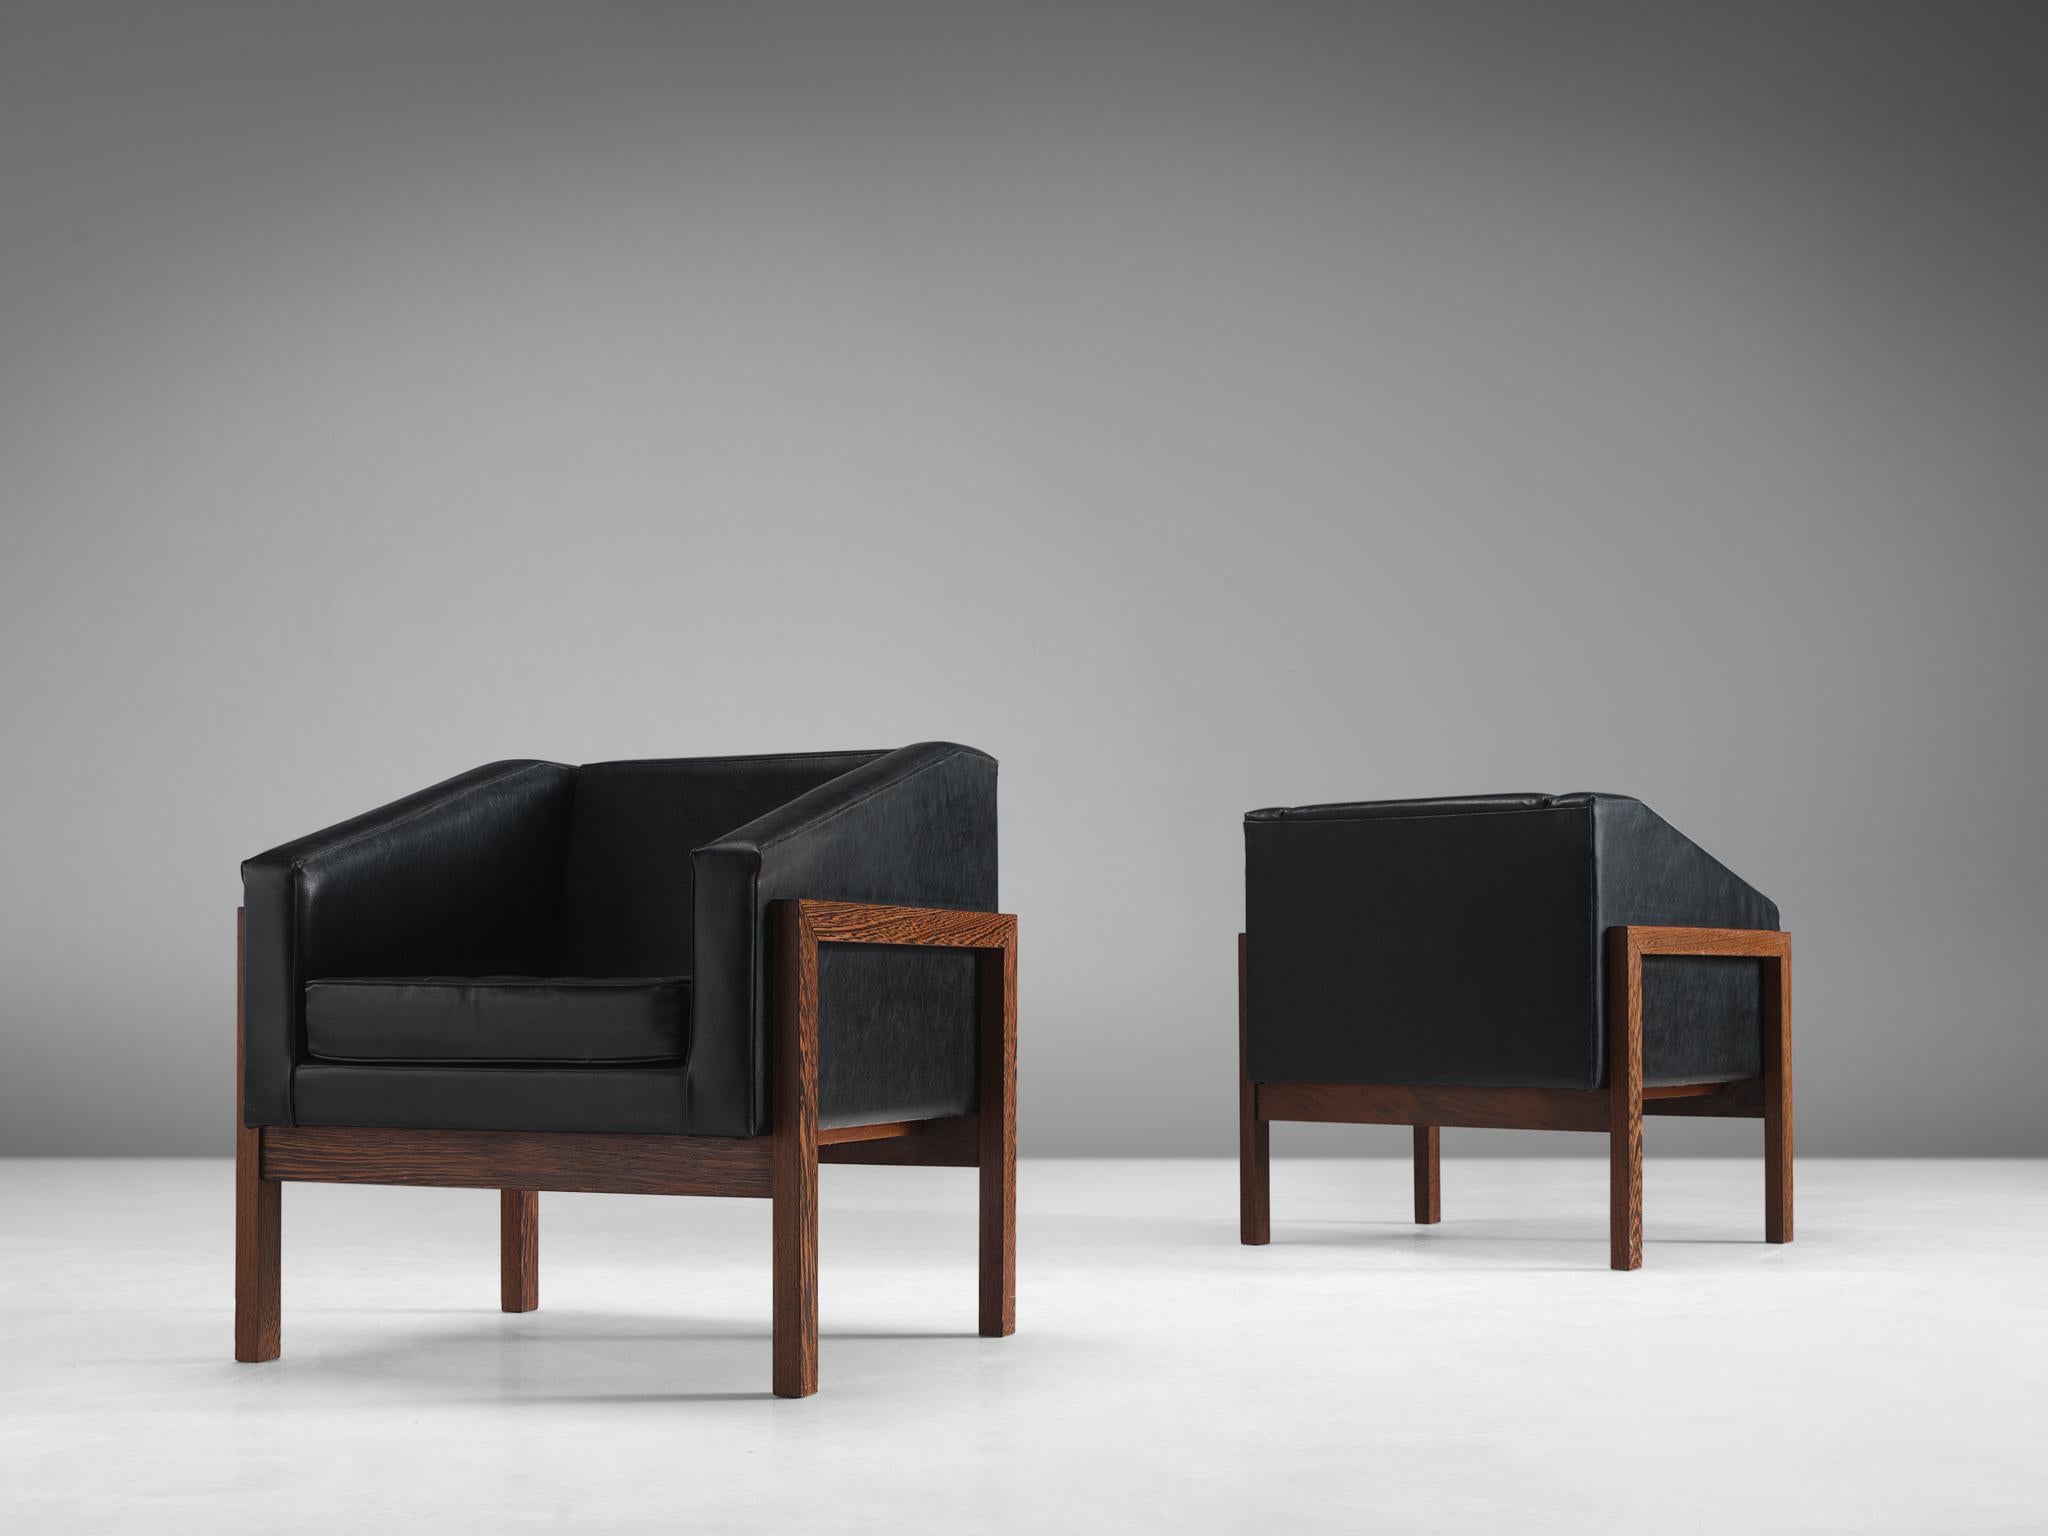 Wim Den Boom, pair of lounge chairs, black faux-leather, wengé, Netherlands, 1960.

These chairs was designed by Wim Den Boon as part of an office interior in Den Haag. The chair bears strong traits of the aesthetic language of Le Corbusier. The